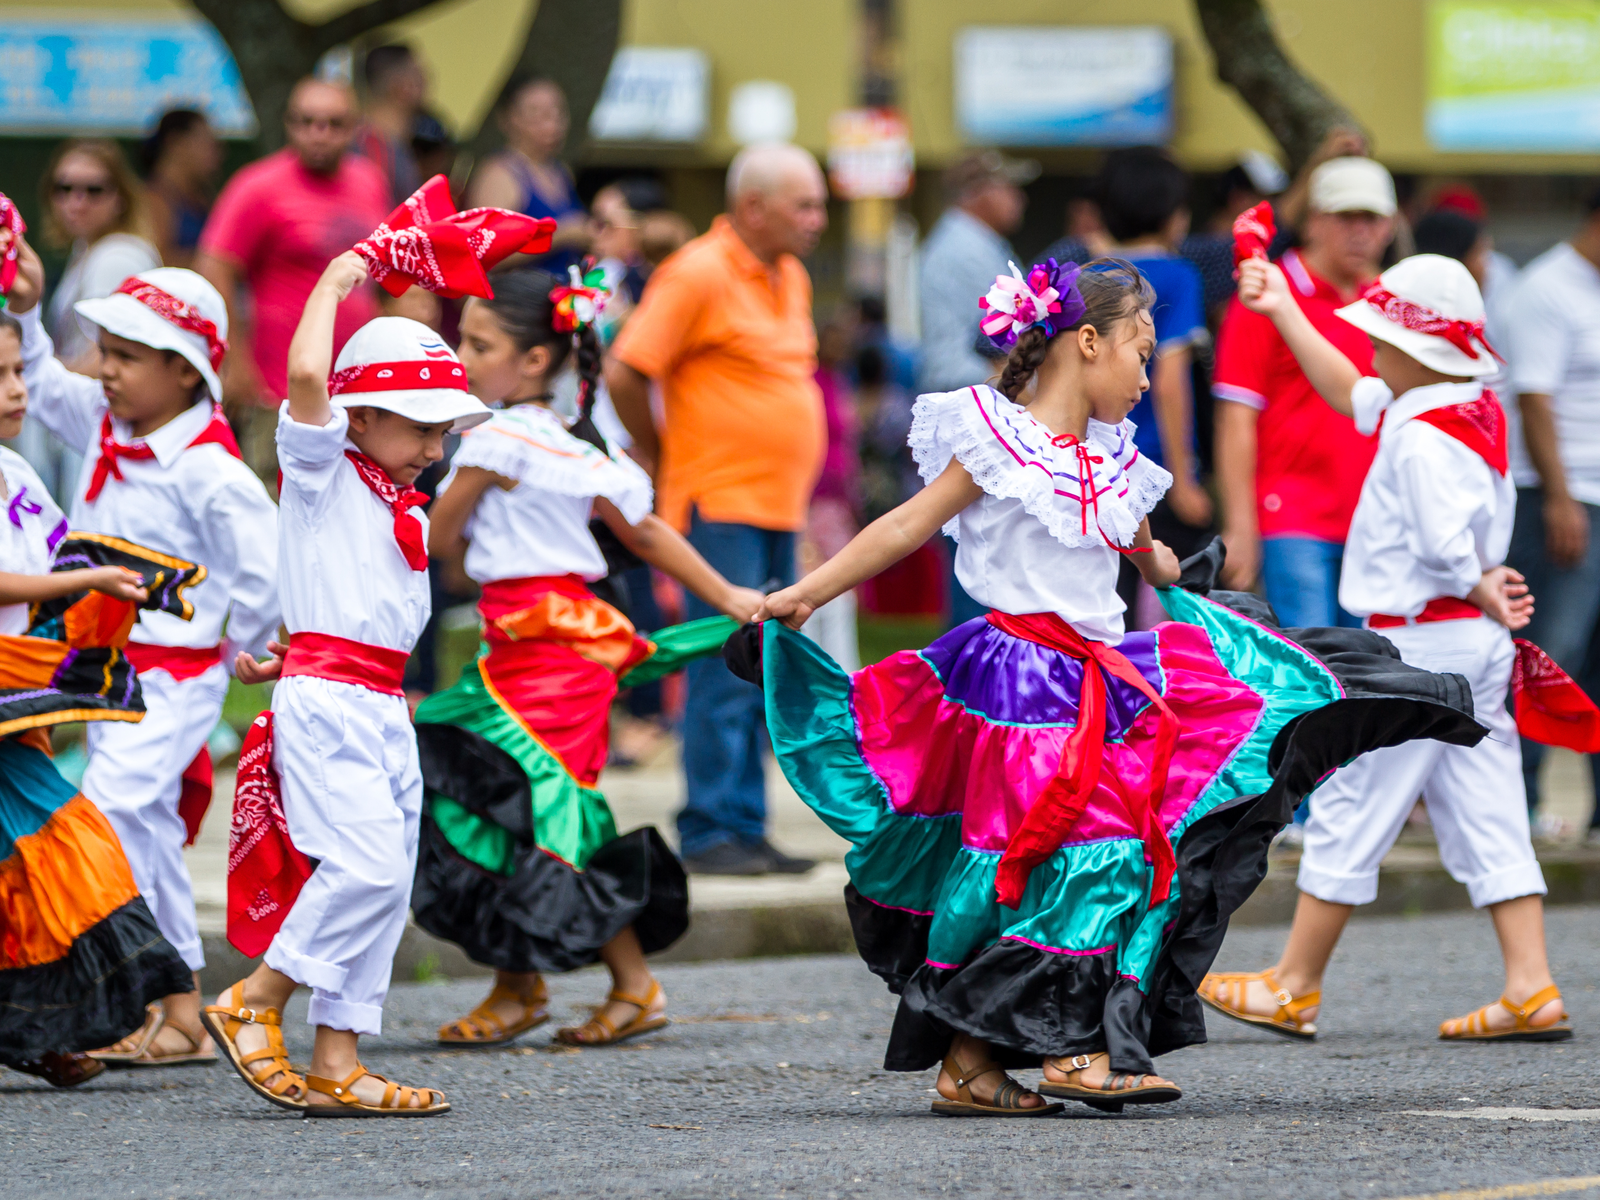 Young children with traditional clothing and dancing in celebration on Independence Day, one of the best things to do in Costa Rica